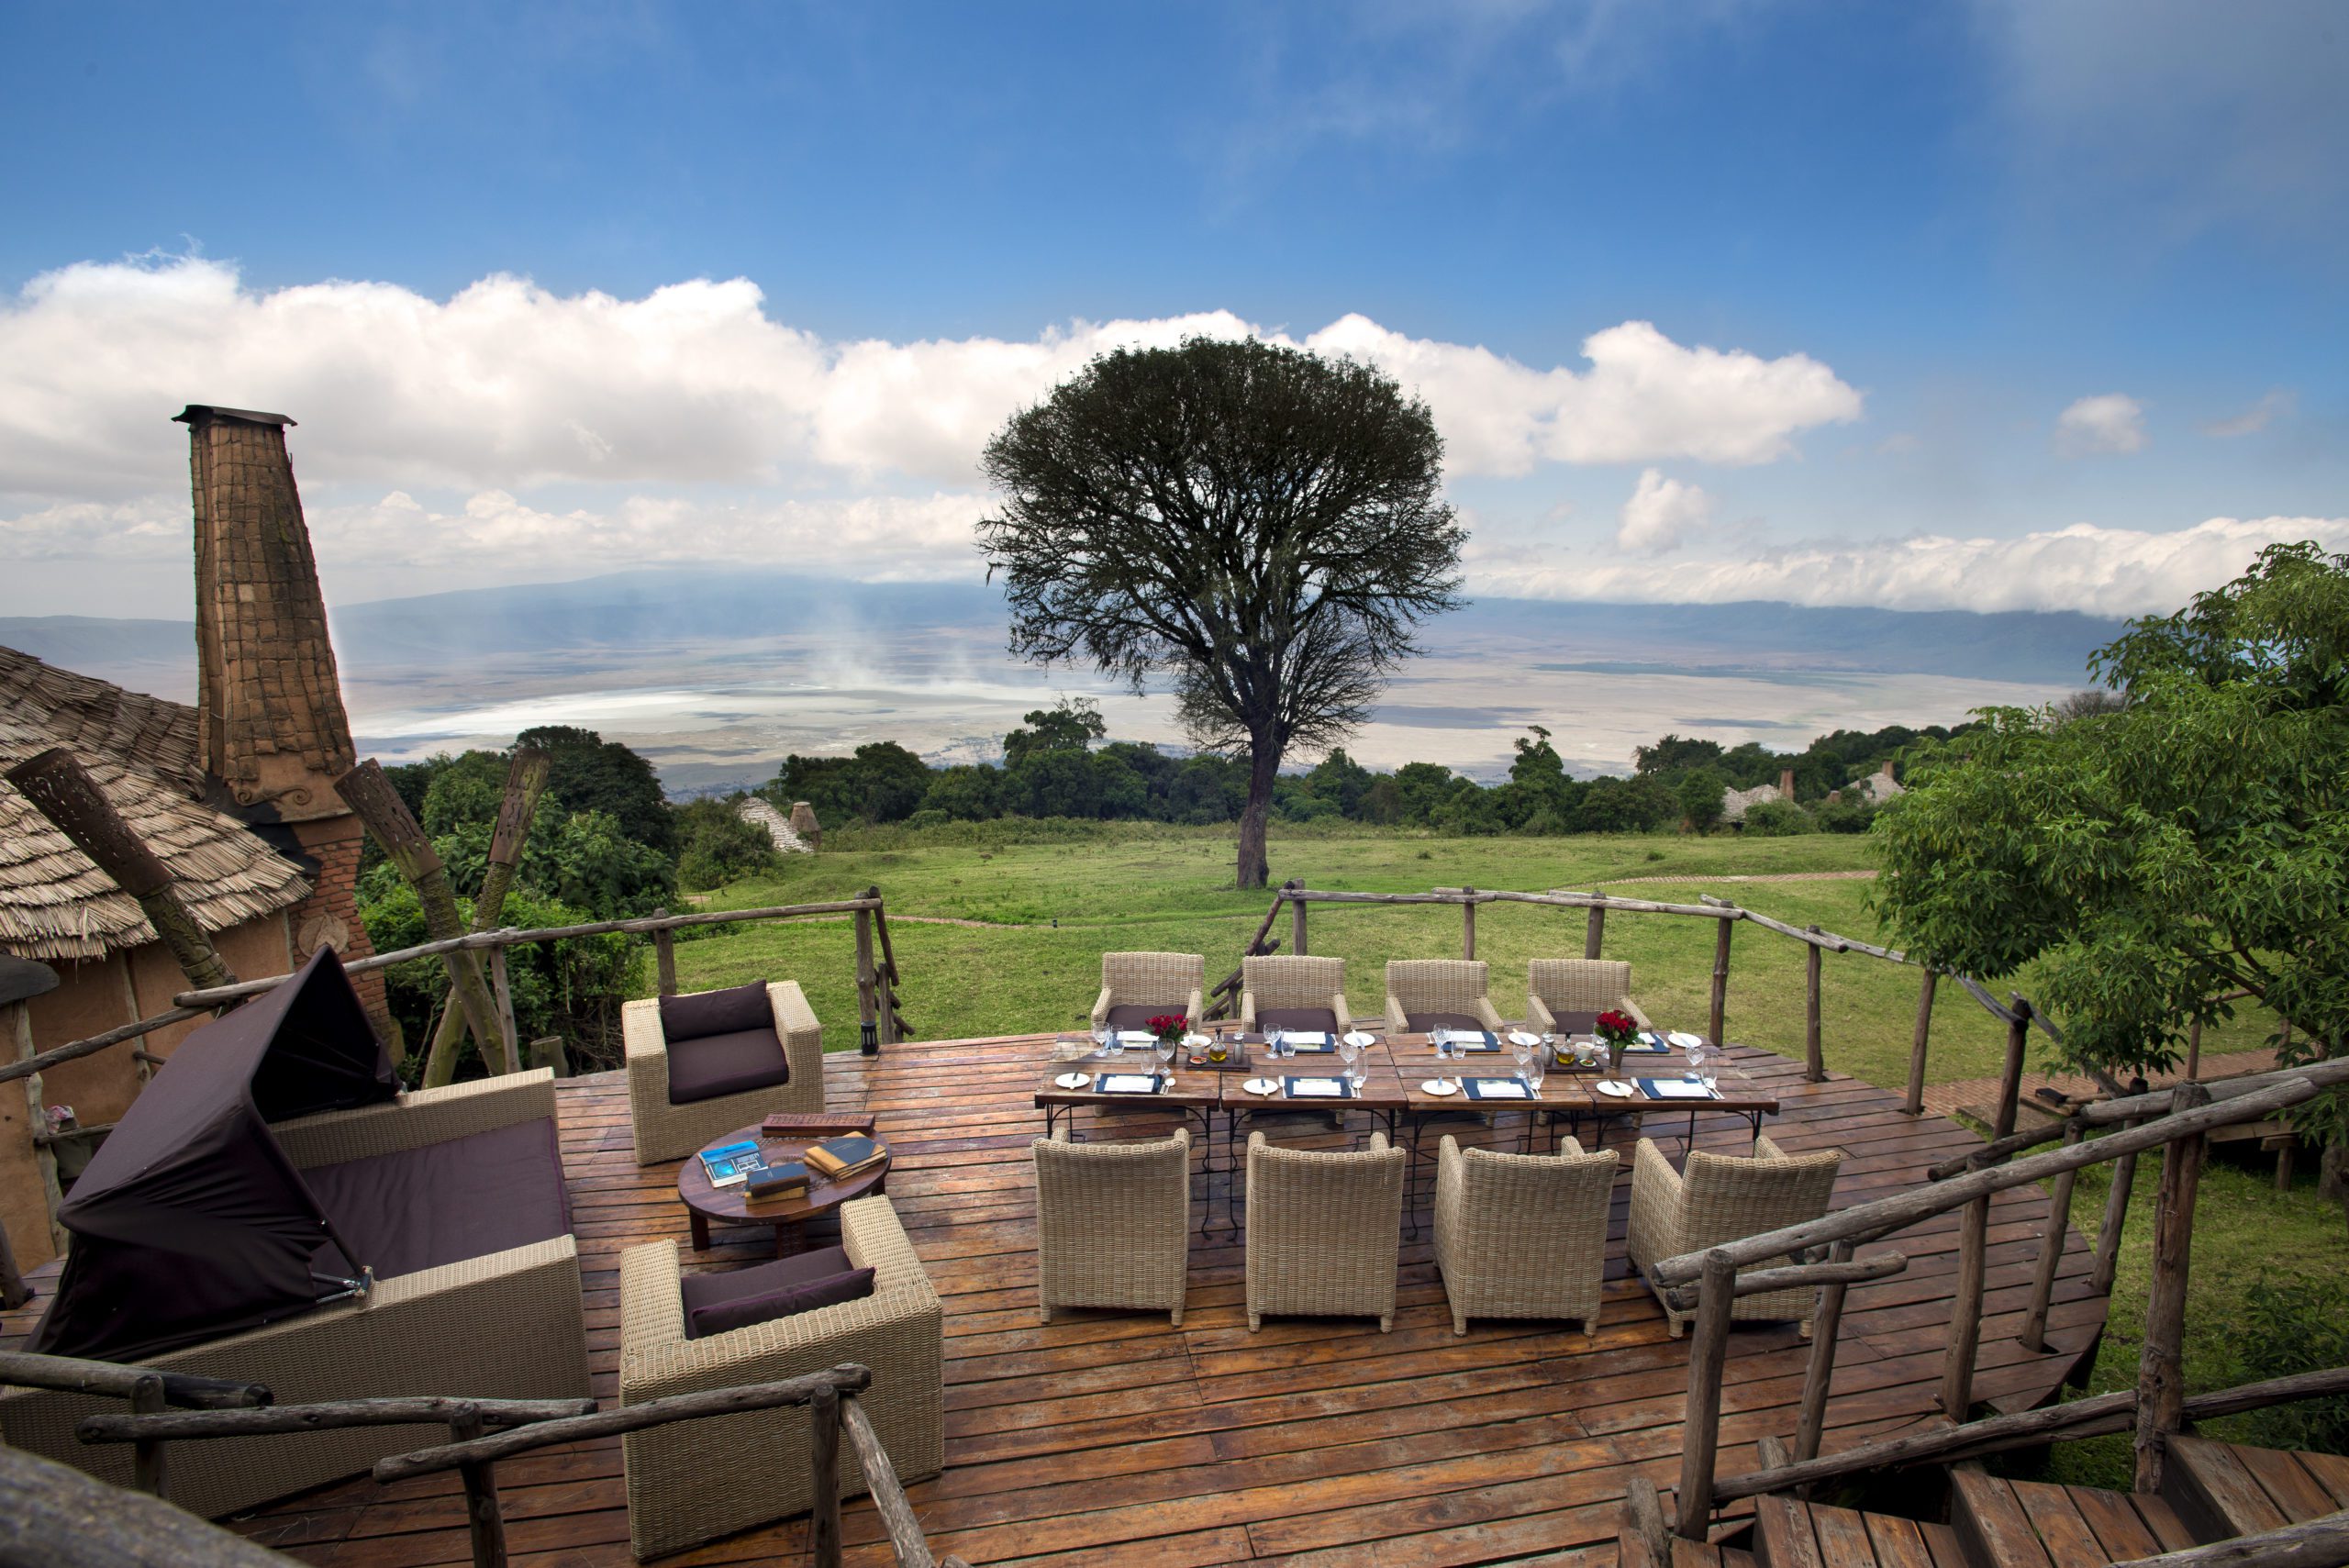 al fresco dinner table on wooden decking overlooking the Ngorongoro Crater with blue skies above